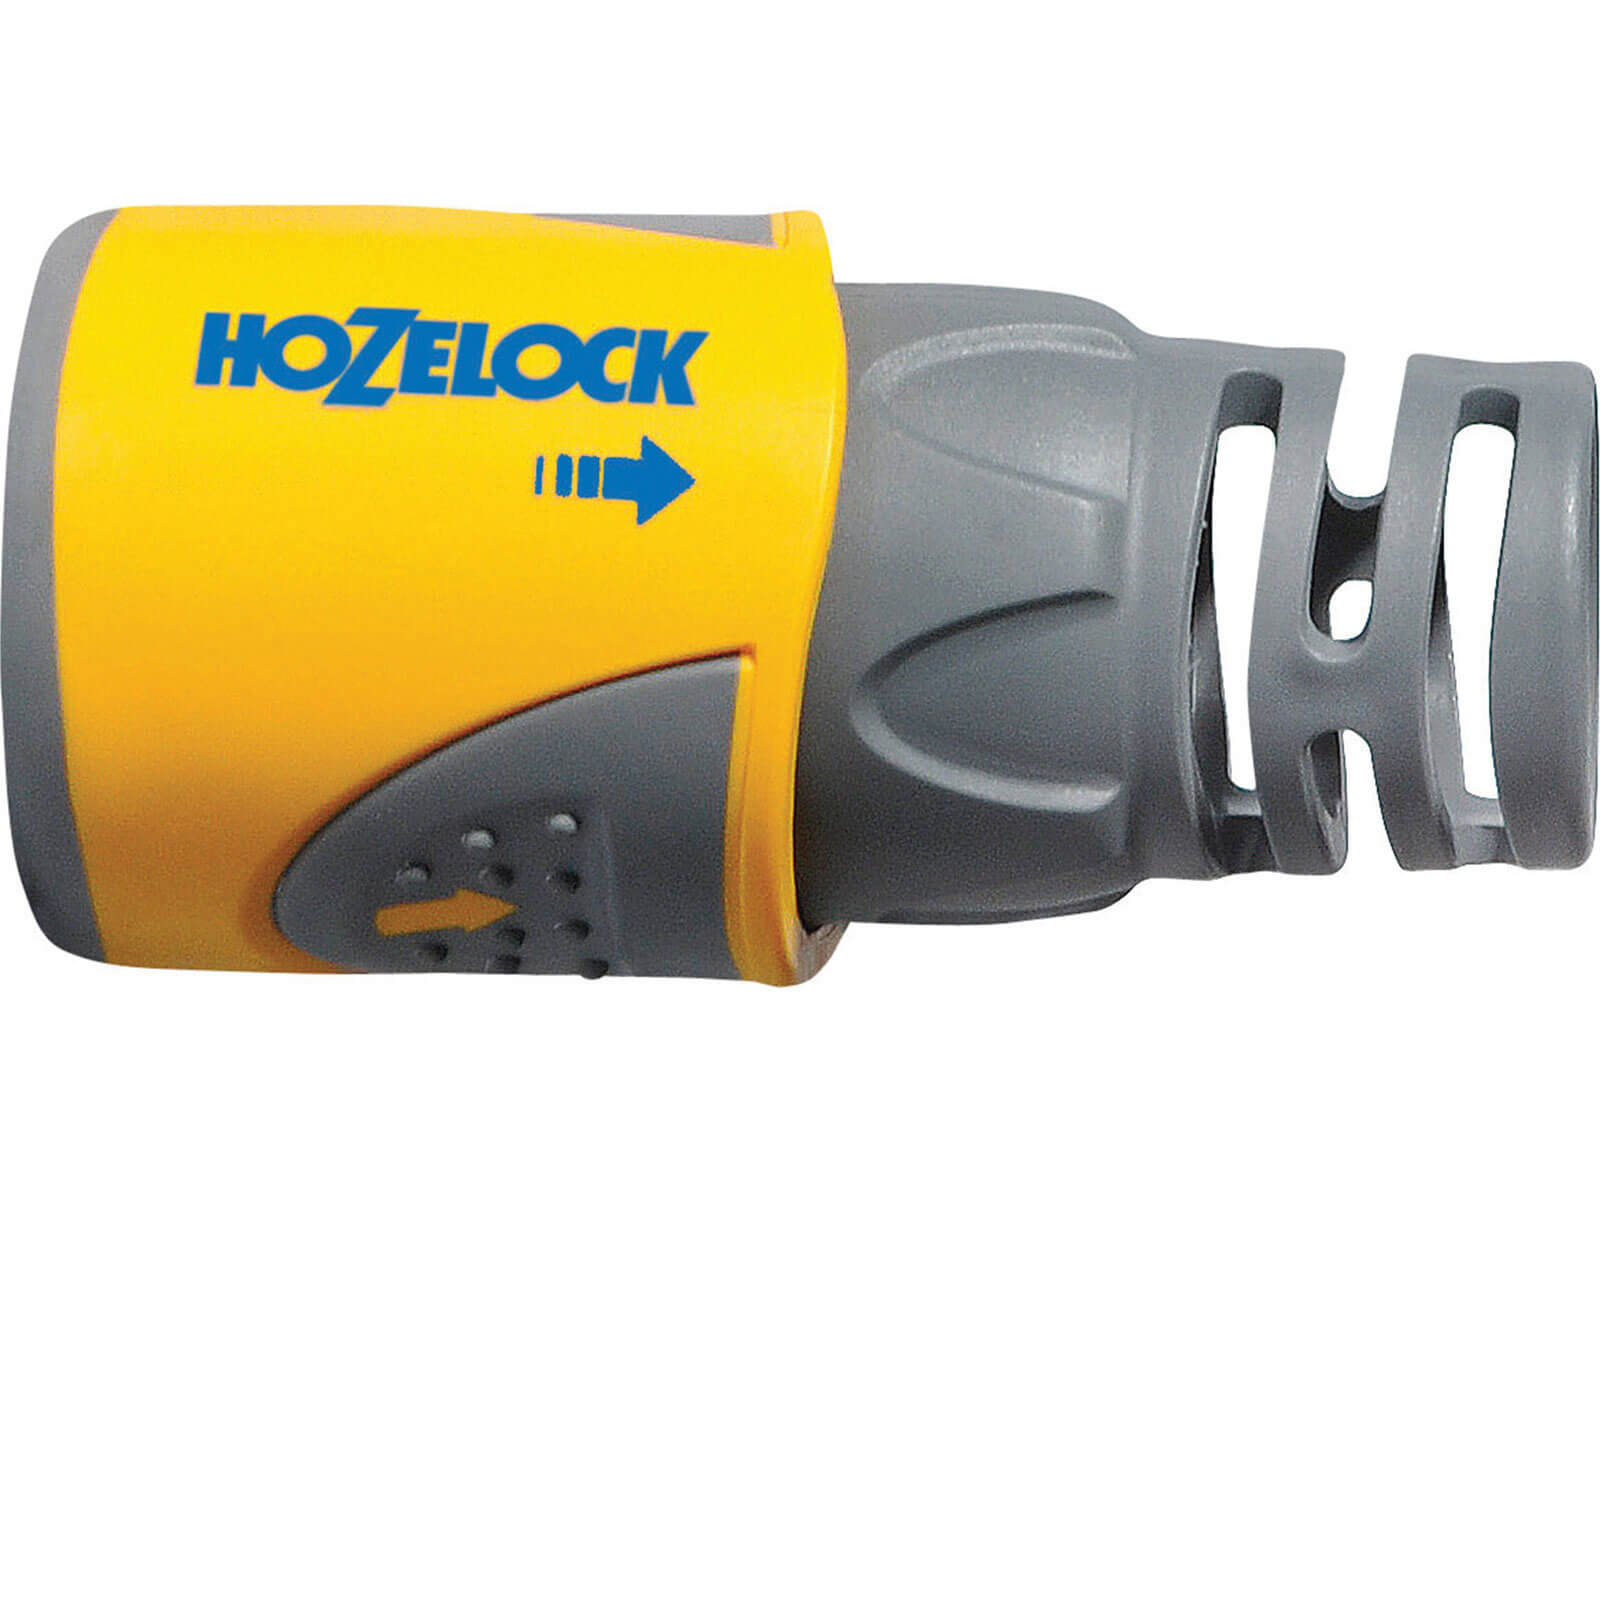 Hozelock Flexible Hose Pipe Connector 1/2" / 12.5mm Pack of 1